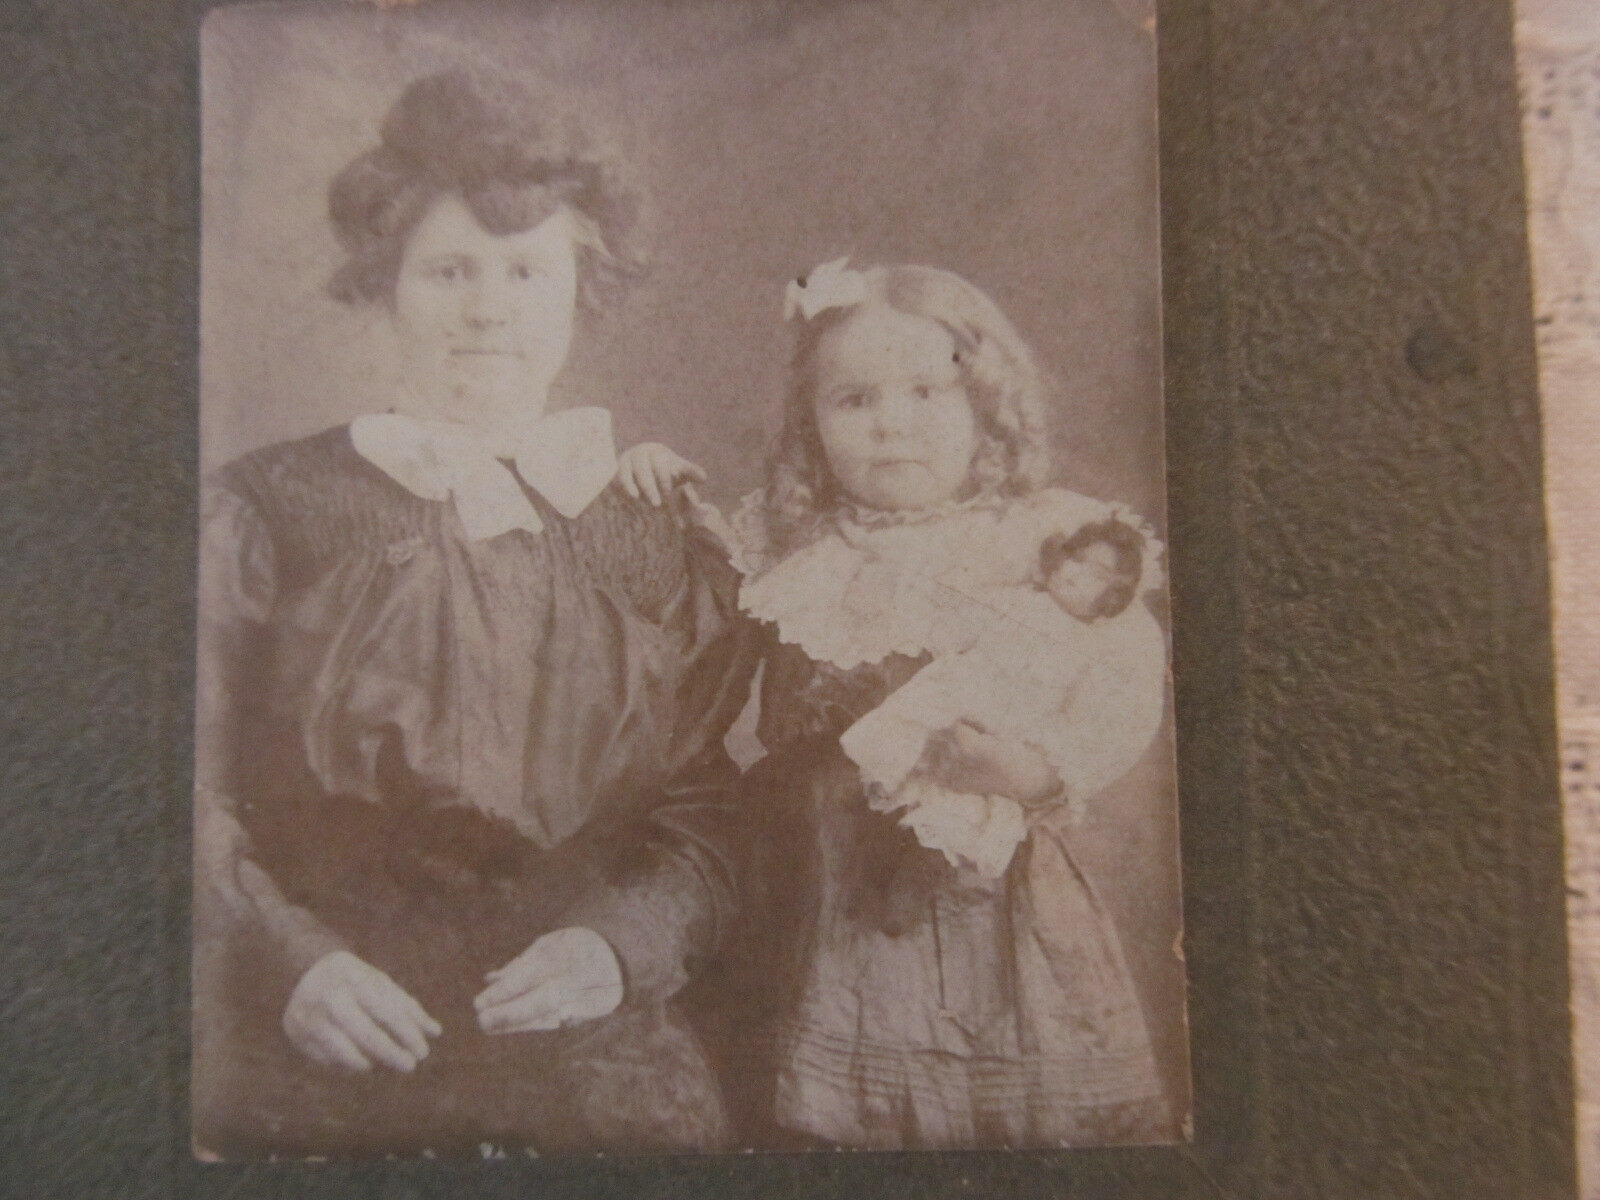 Chubby Cheek Little Girl w/Bisque Head Doll Antique Photograph~early 1900s